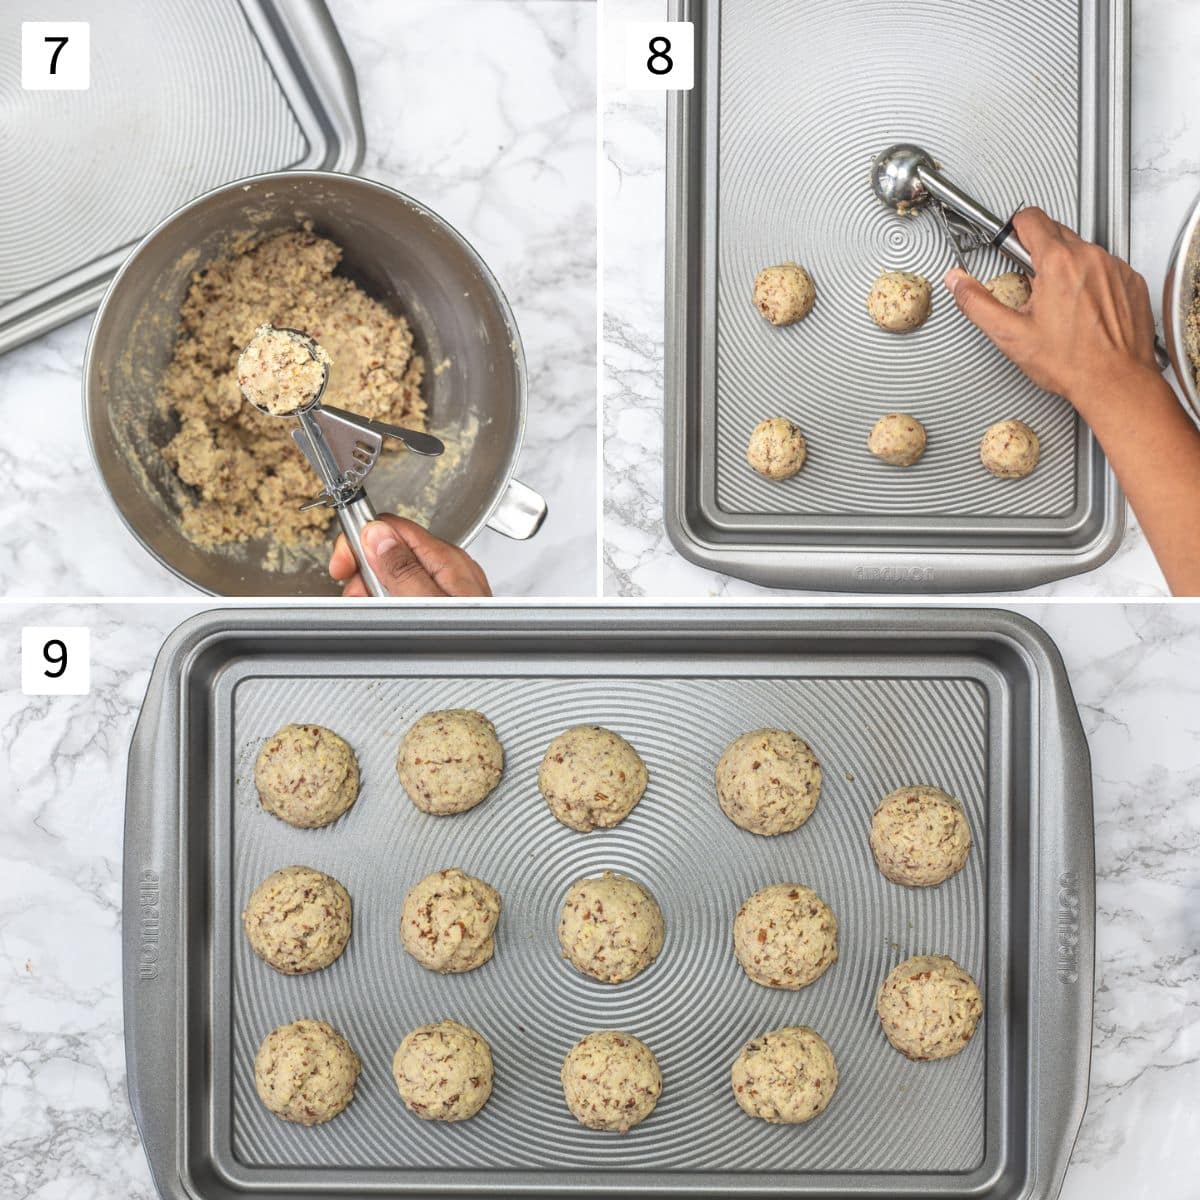 Collage of 3 images showing making cookie balls and baked cookies in a tray.